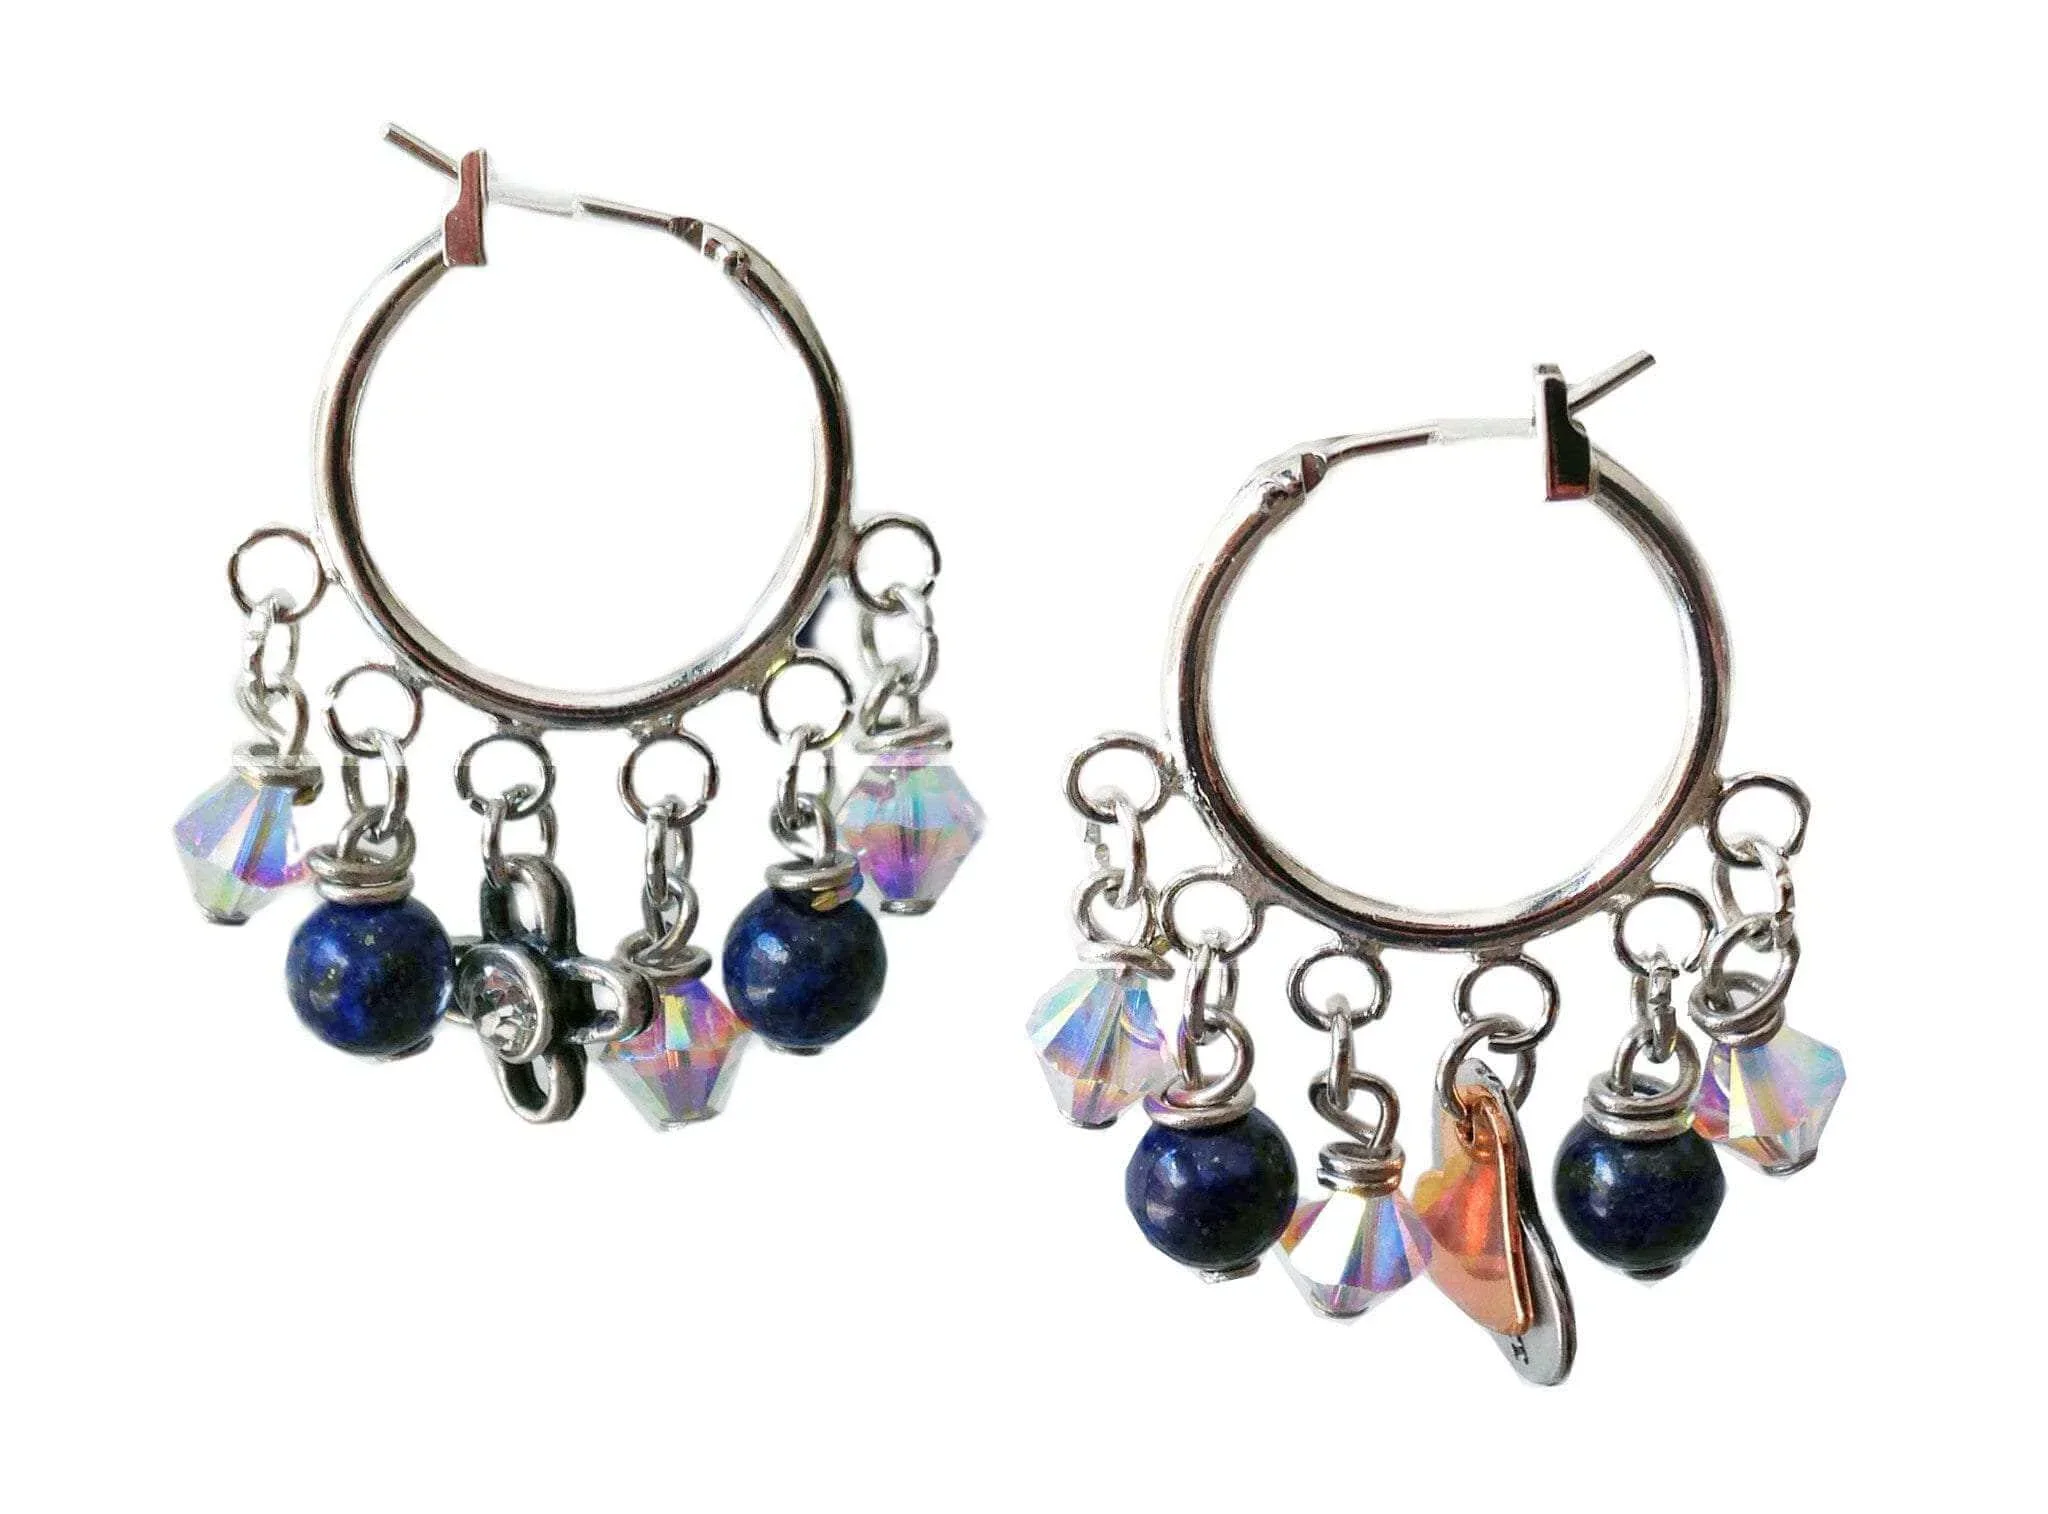 Earrings made with crystallized swarovski elements, silver plated brass and natural lapislazzuli stones. 